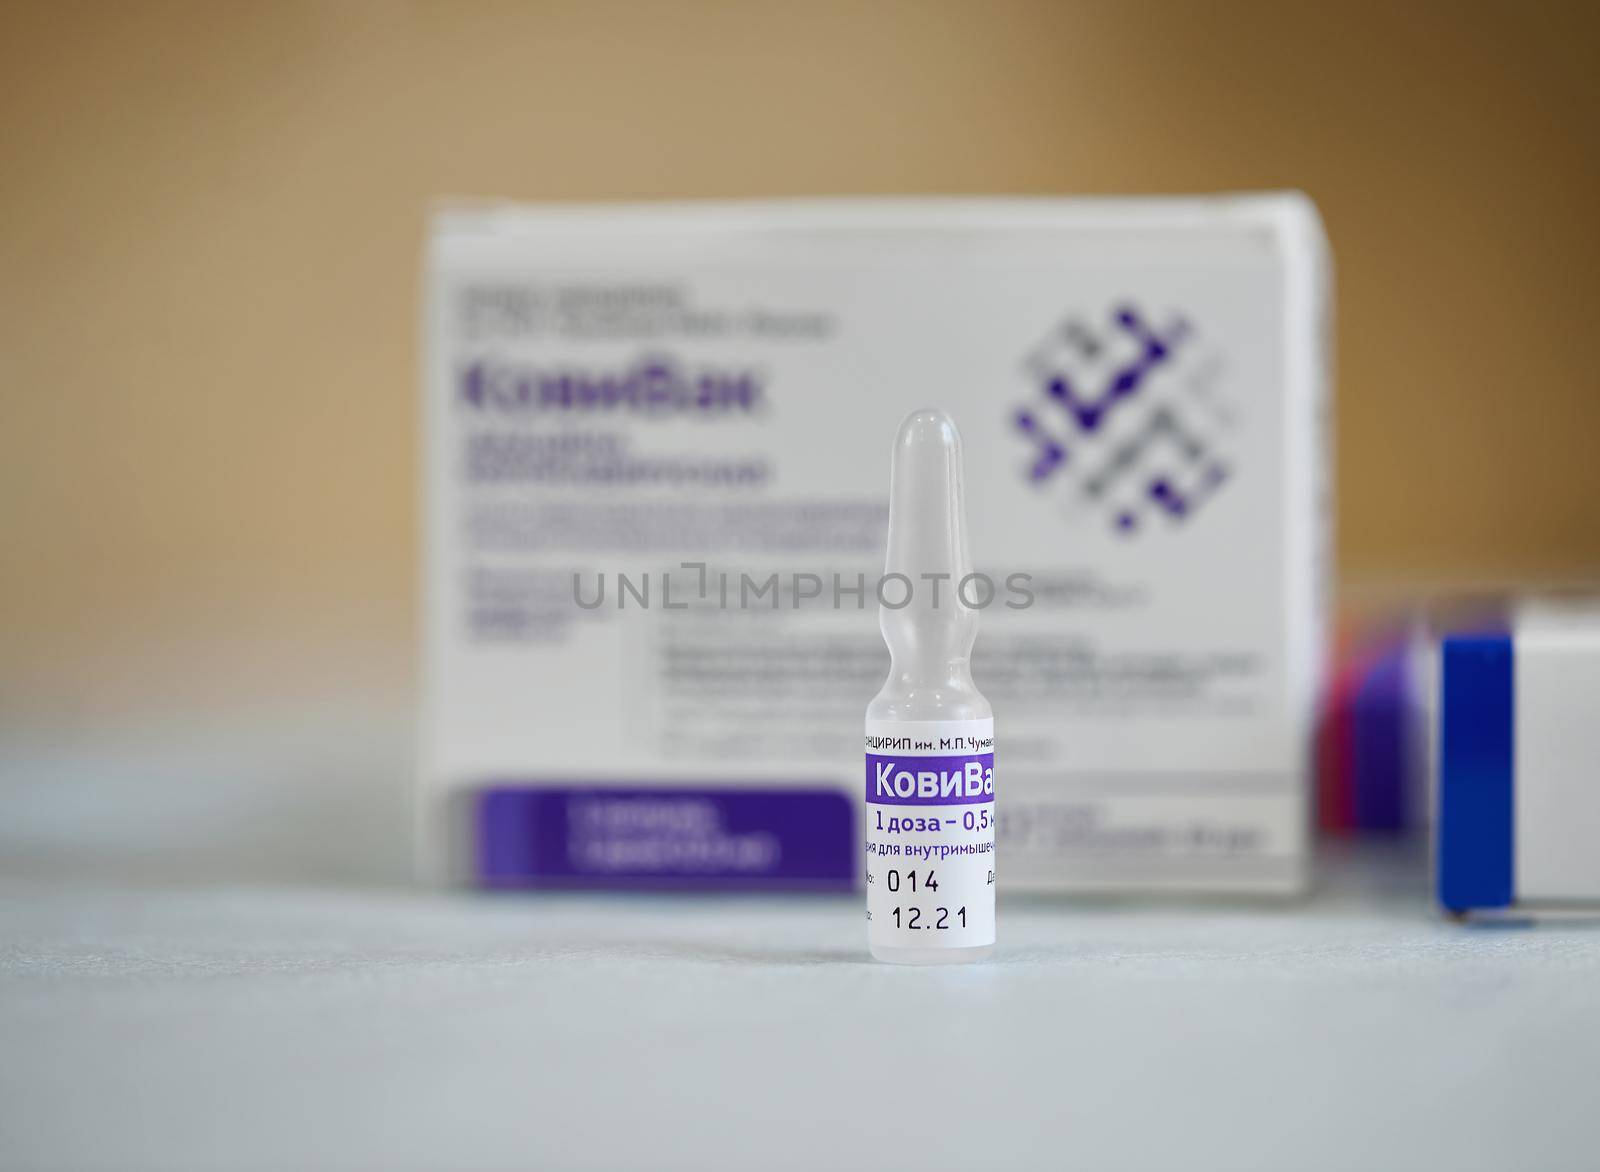 Box and ampoules with new Russian vaccine against coronavirus SARS-CoV-2, CoviVac. CoviVac is developed by the Chumakov Centre. Vaccine for prevention COVID-19. 26.08.2021, Moscow, Russia.